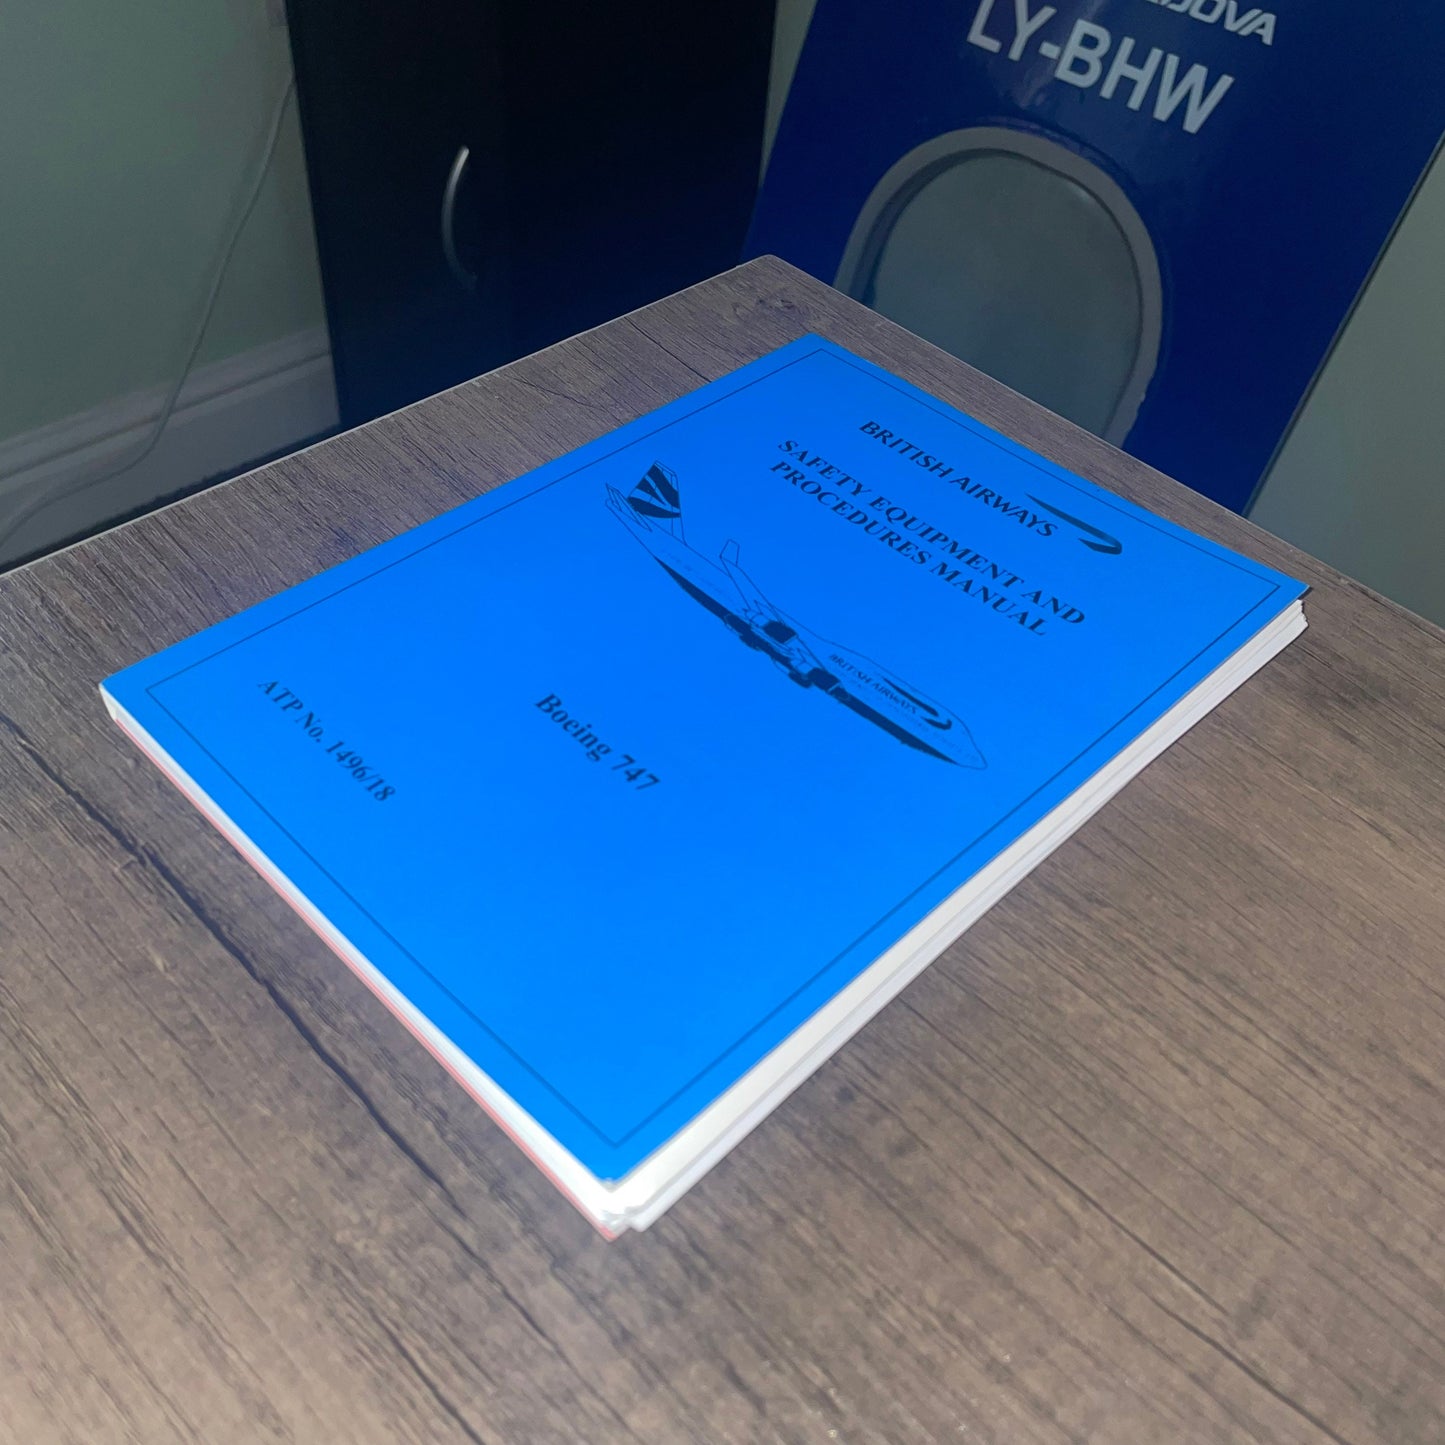 British Airways Boeing 747 Safety Equipment Manual Revision 3 May 2009 Engineering Training Rare Boeing Collectible Airbus